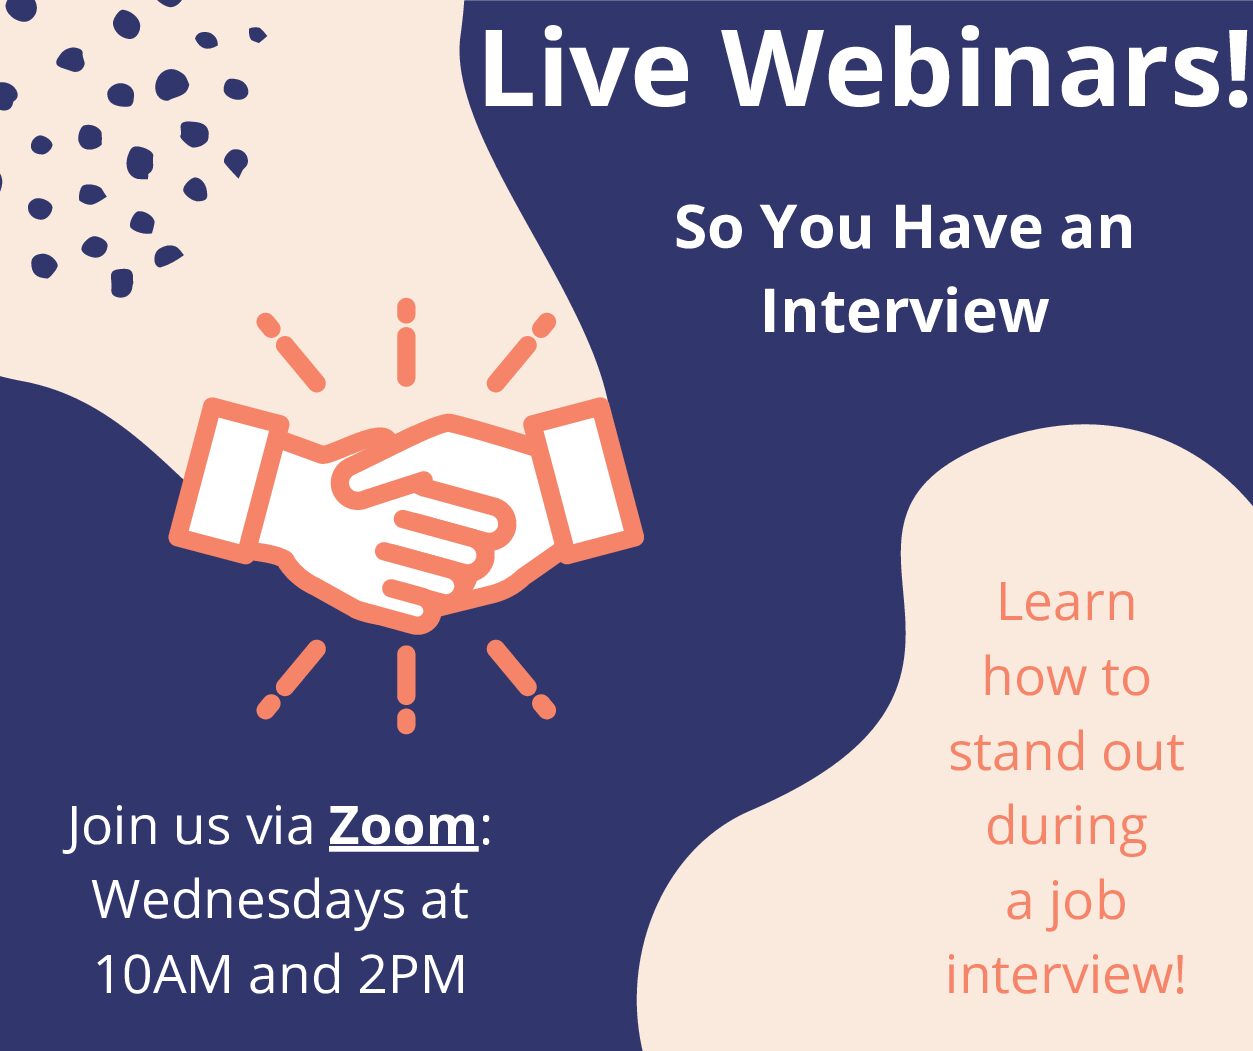 So You Have an Interview (Live Webinar)